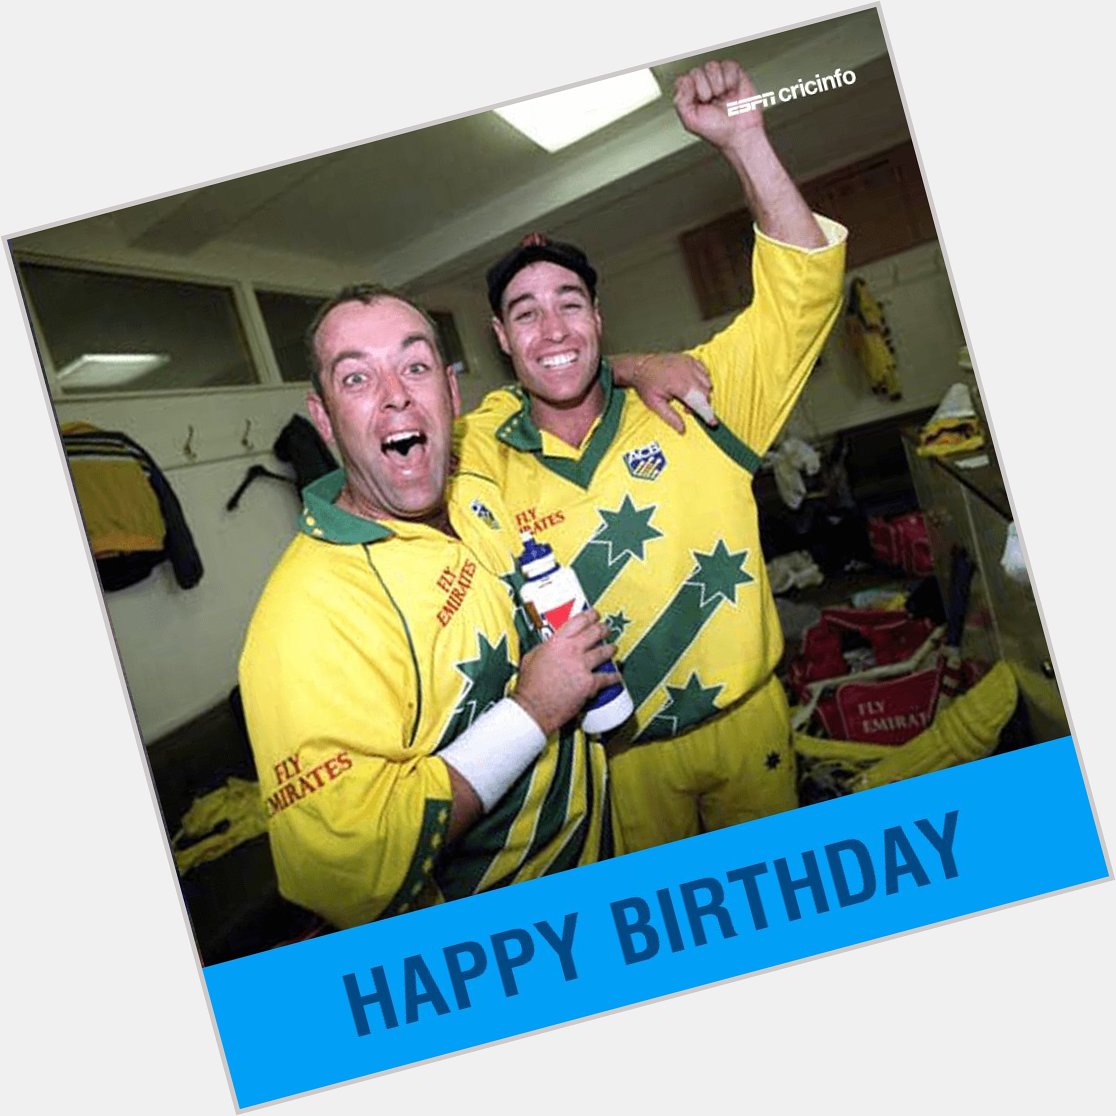  Happy birthday to Michael Bevan!

The best ODI finisher of all time? 

 